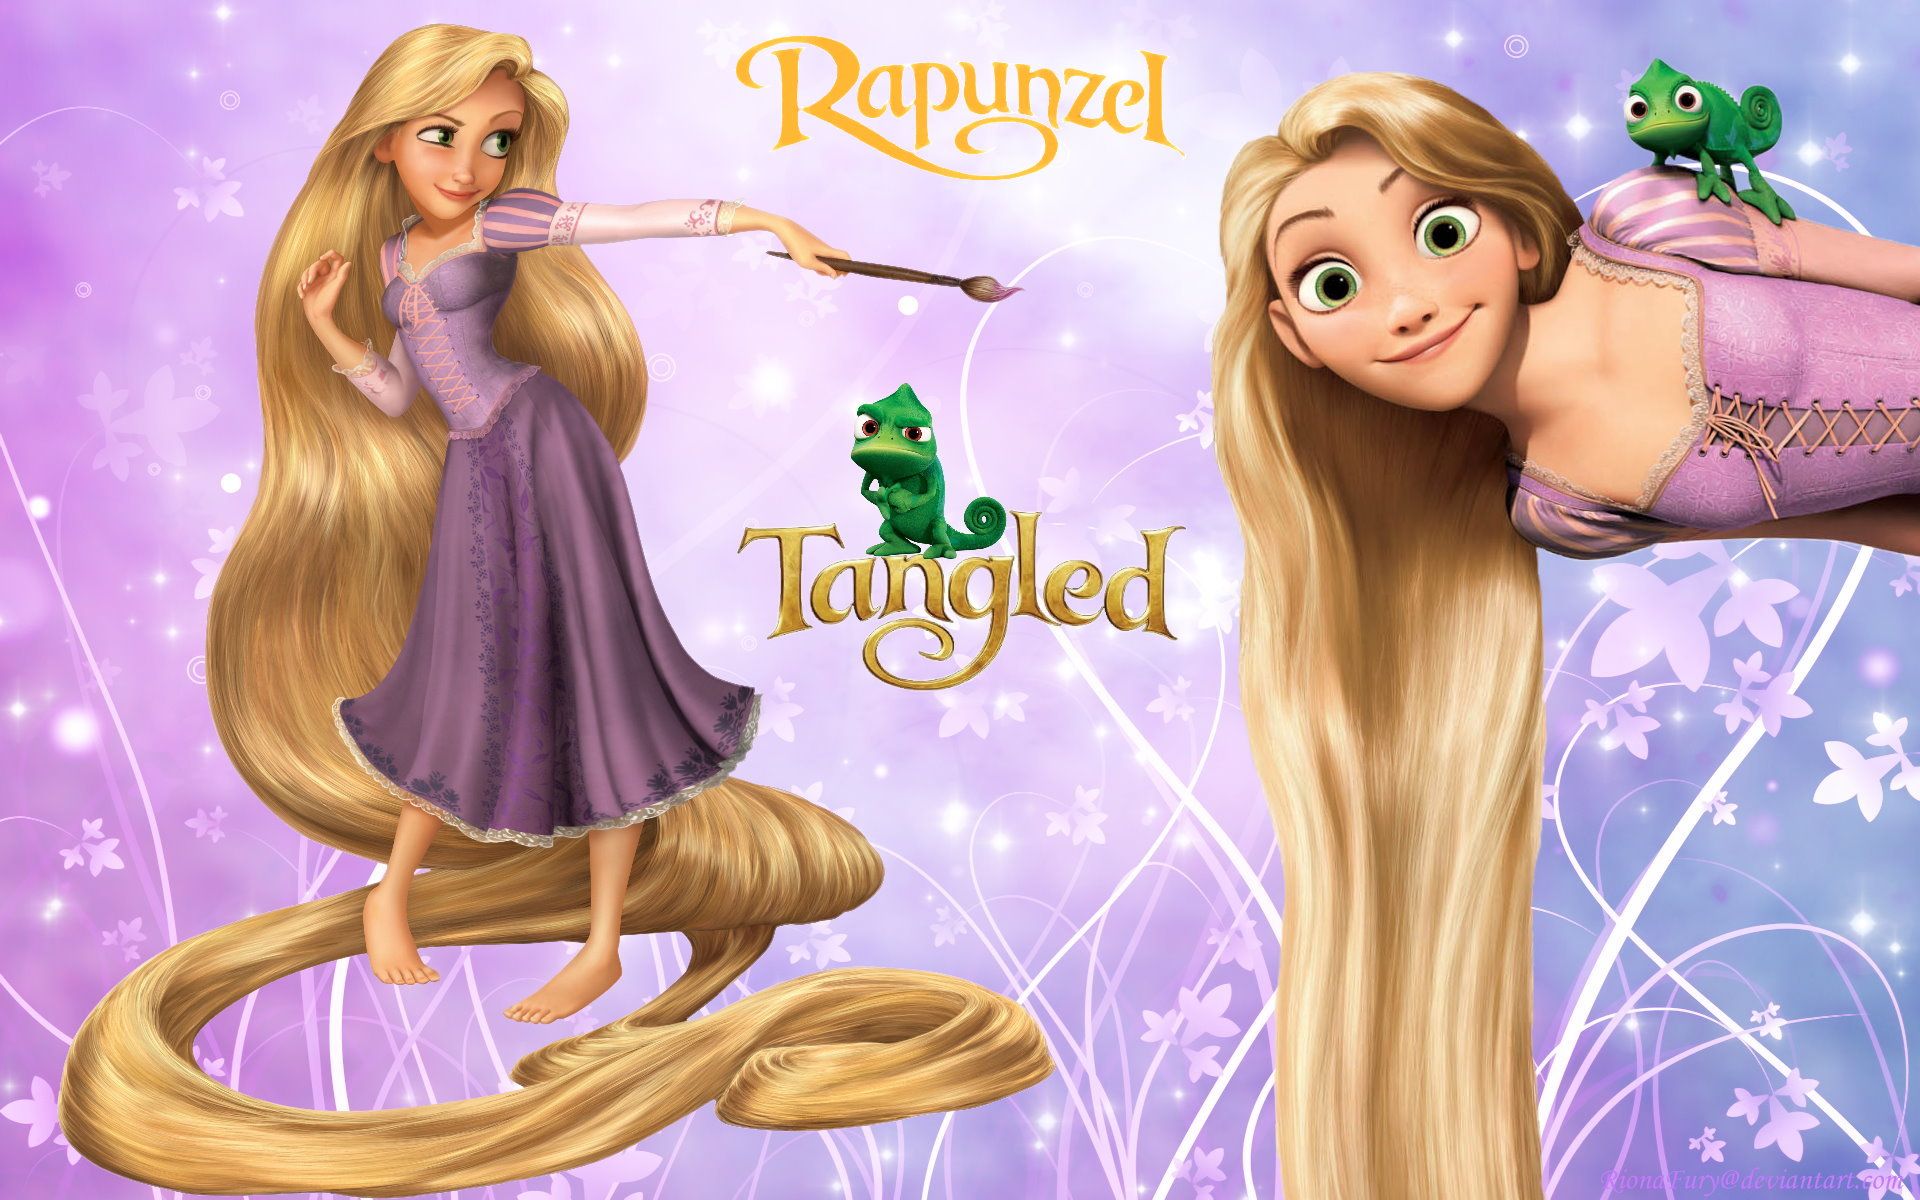 Free download Tangled image Disney Princess Rapunzel HD wallpaper and background [1920x1200] for your Desktop, Mobile & Tablet. Explore Disney Princess Rapunzel Wallpaper. Disney Princess Wallpaper, Disney Princess Wallpaper